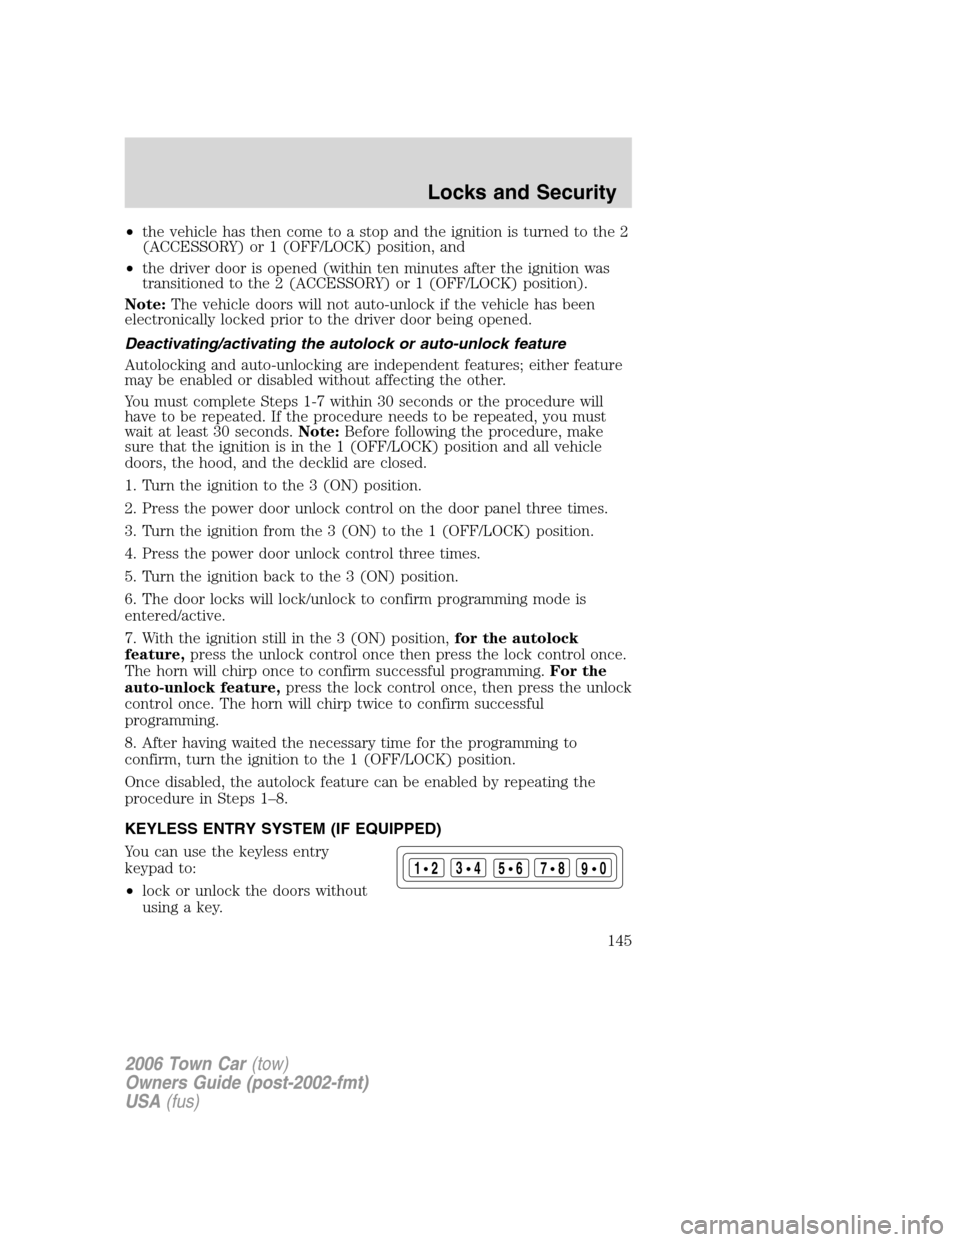 LINCOLN TOWN CAR 2006  Owners Manual •the vehicle has then come to a stop and the ignition is turned to the 2
(ACCESSORY) or 1 (OFF/LOCK) position, and
•the driver door is opened (within ten minutes after the ignition was
transitione